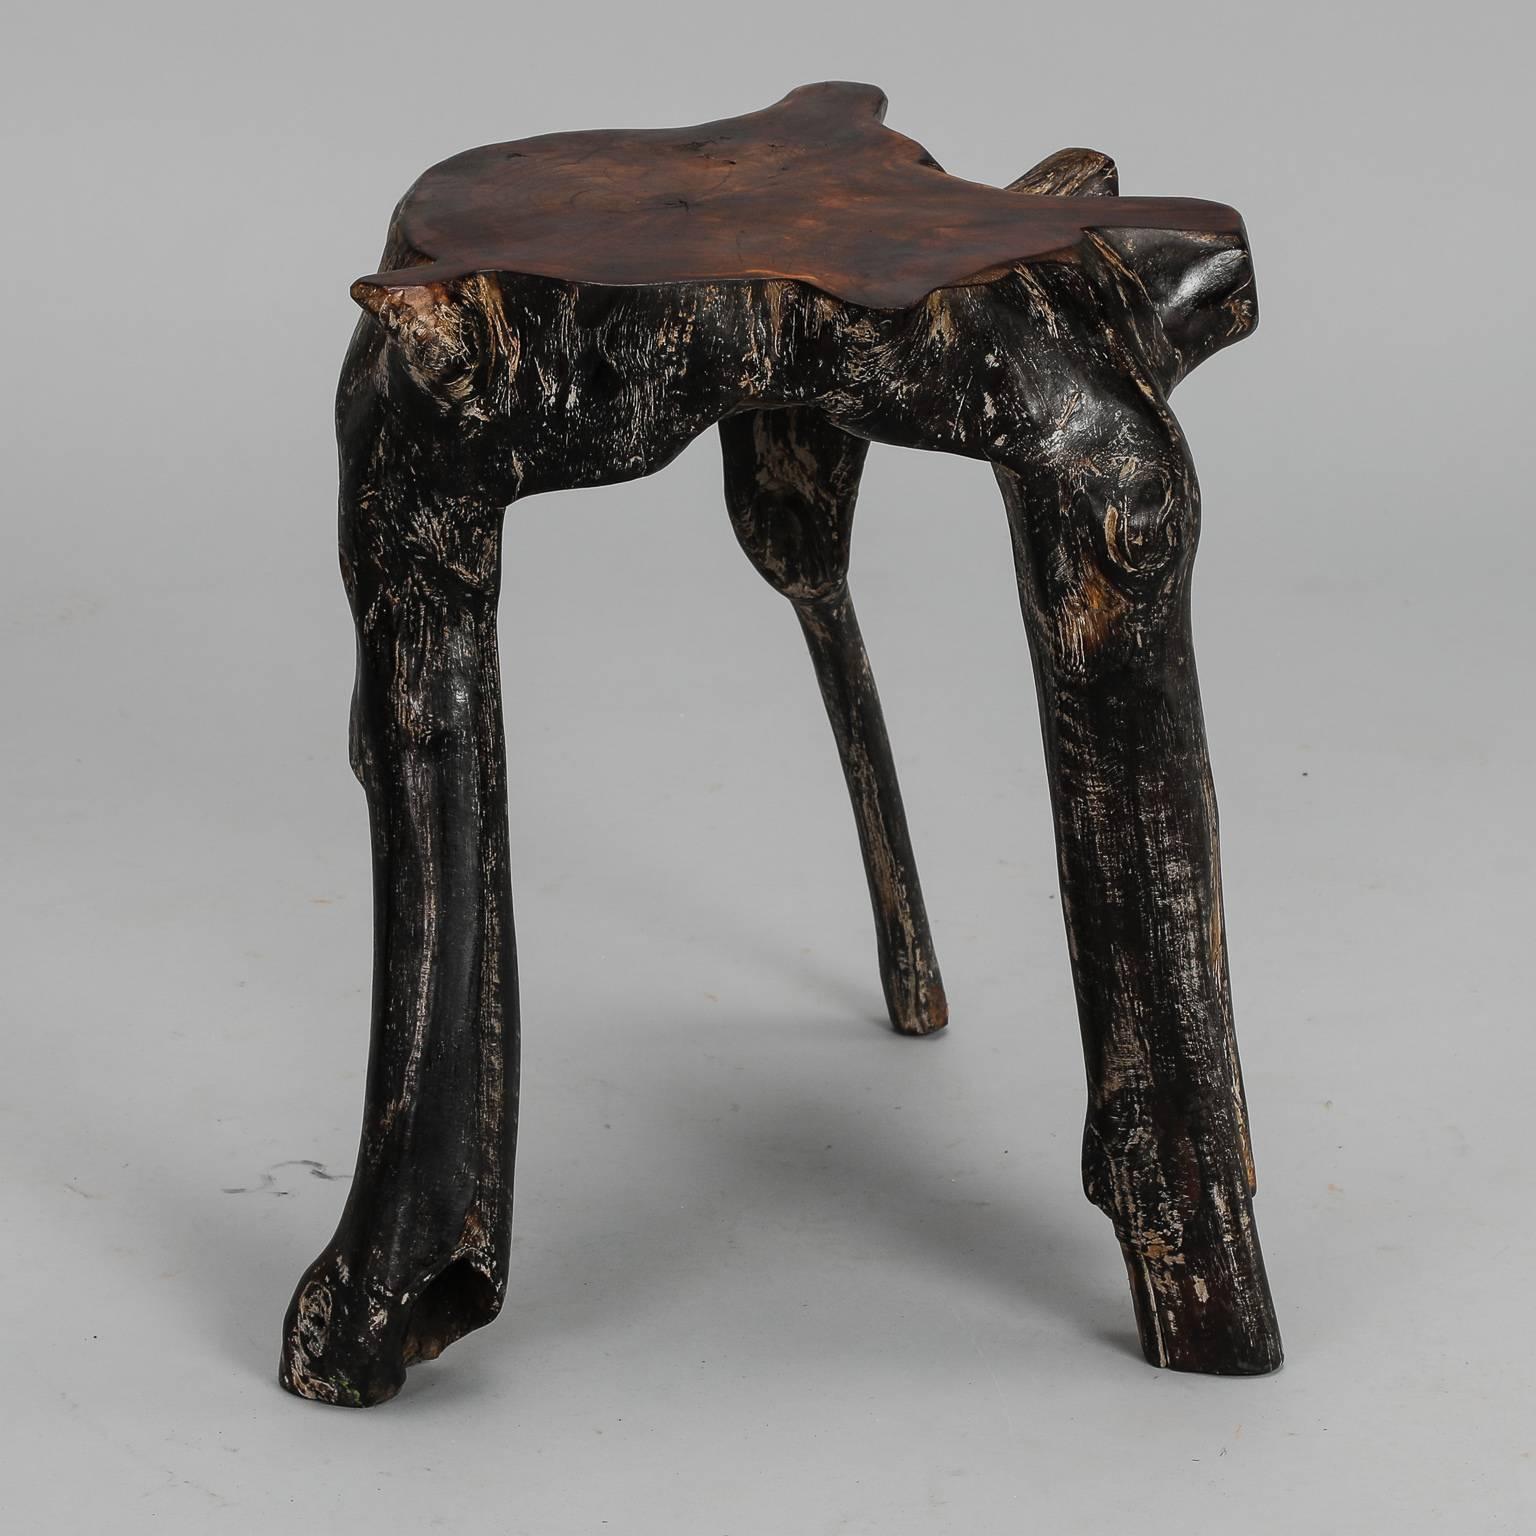 Chinese side table has tabletop consisting of tree trunk sliced flat and polished with three of the original roots forming the legs, circa 1960s.